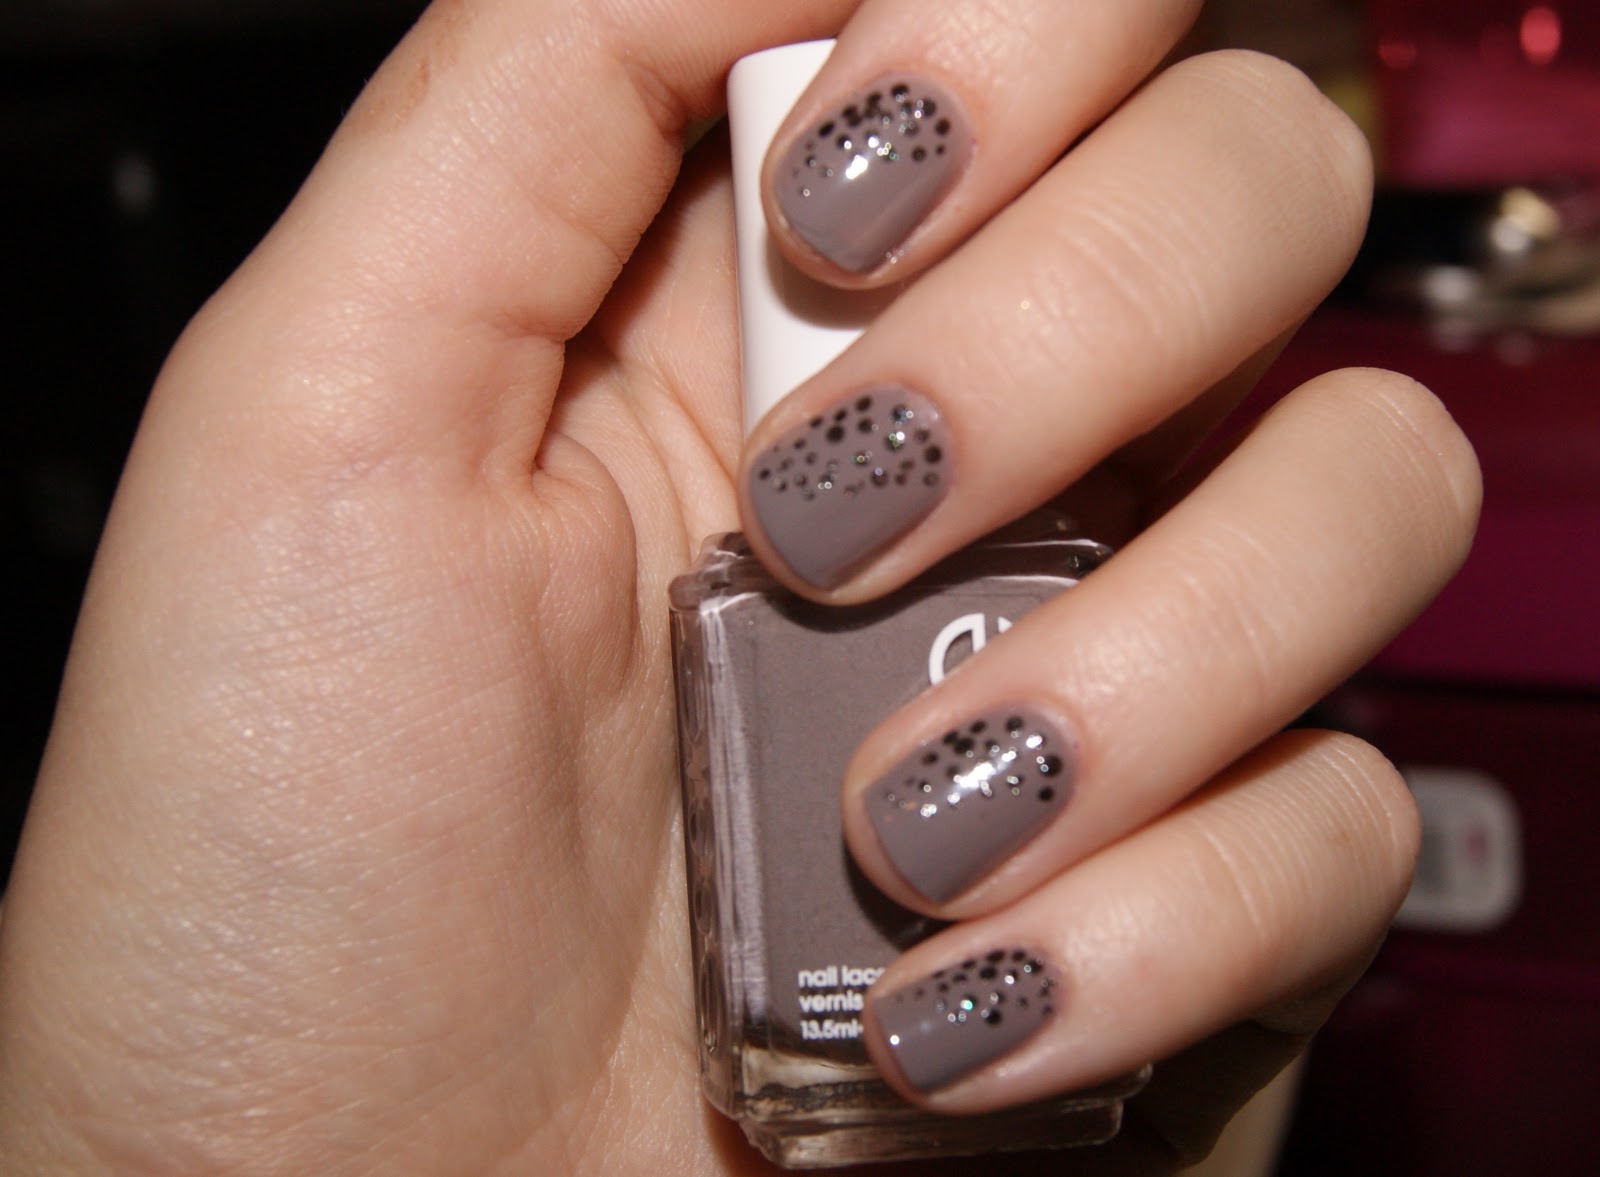 But I like this for a gray tone nail-polish!